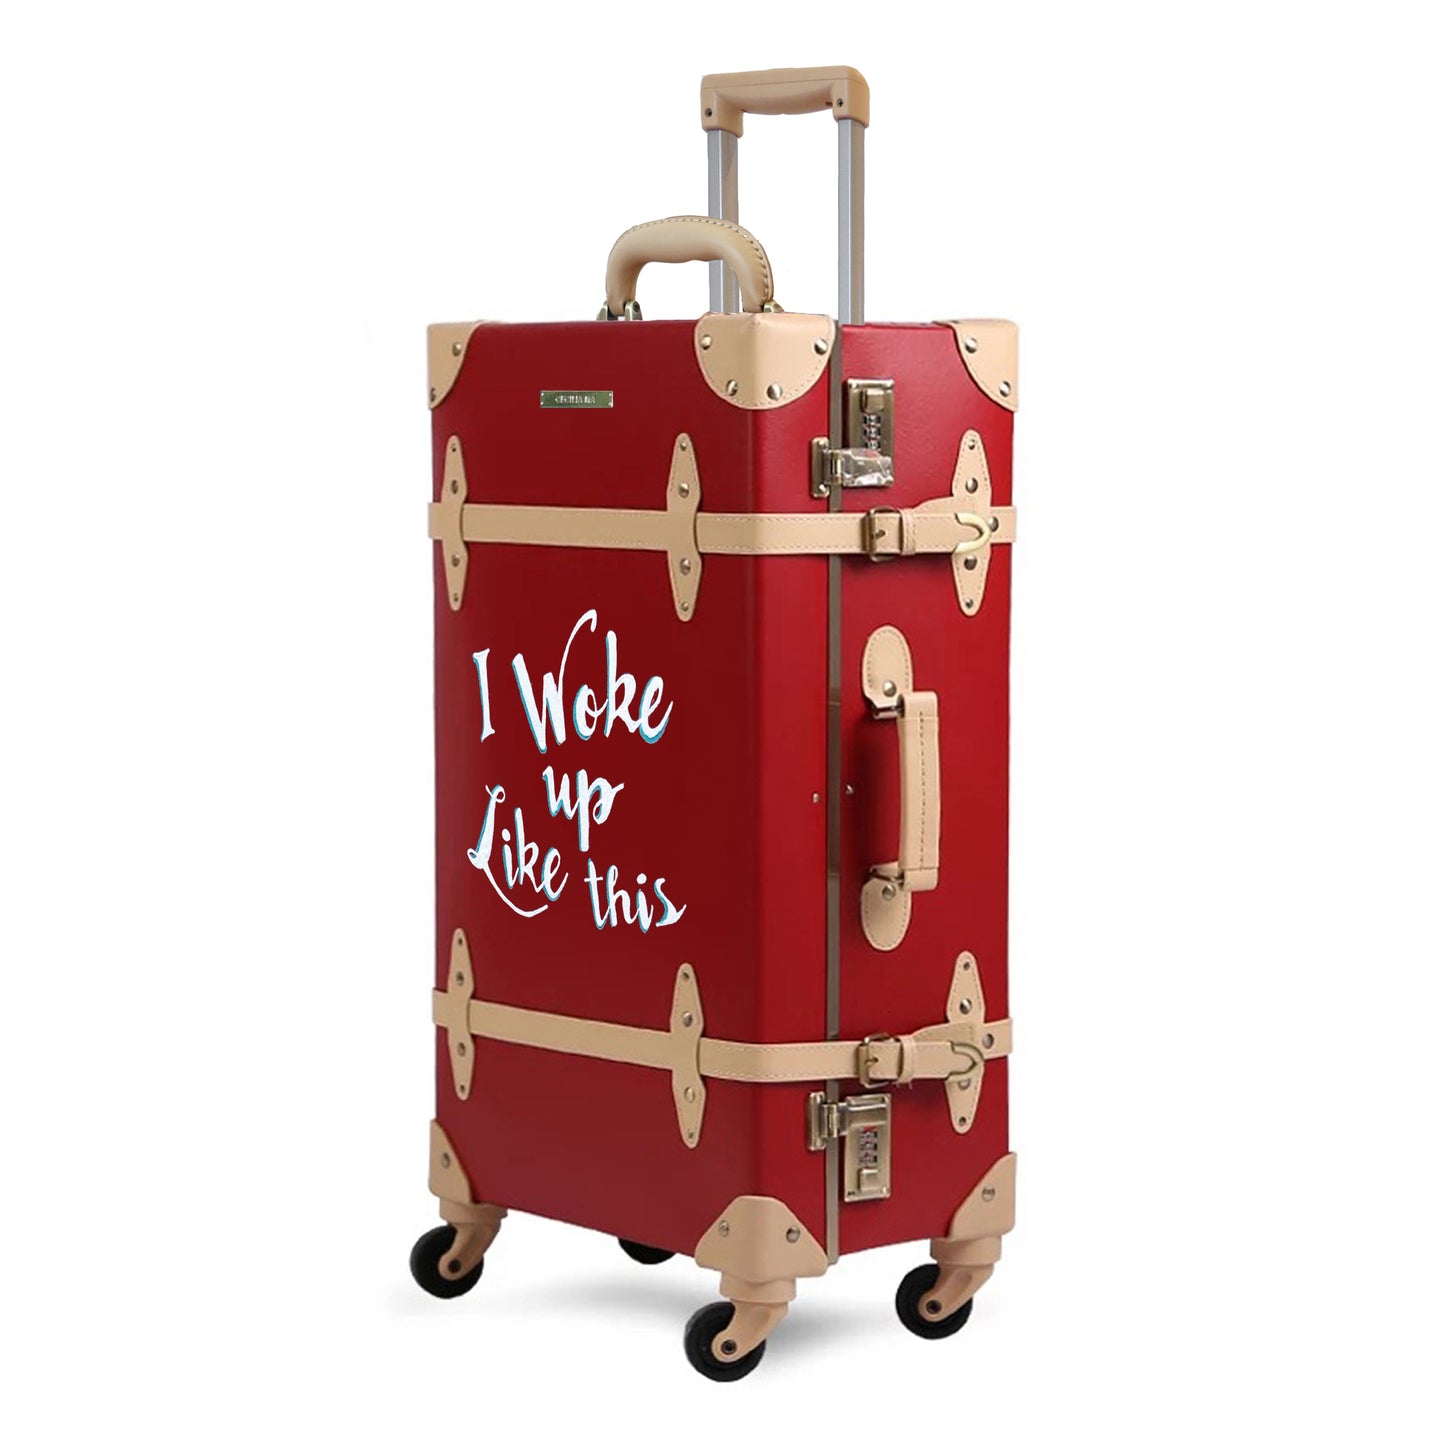 WOKE UP | Suitcase | 22 inch | Red